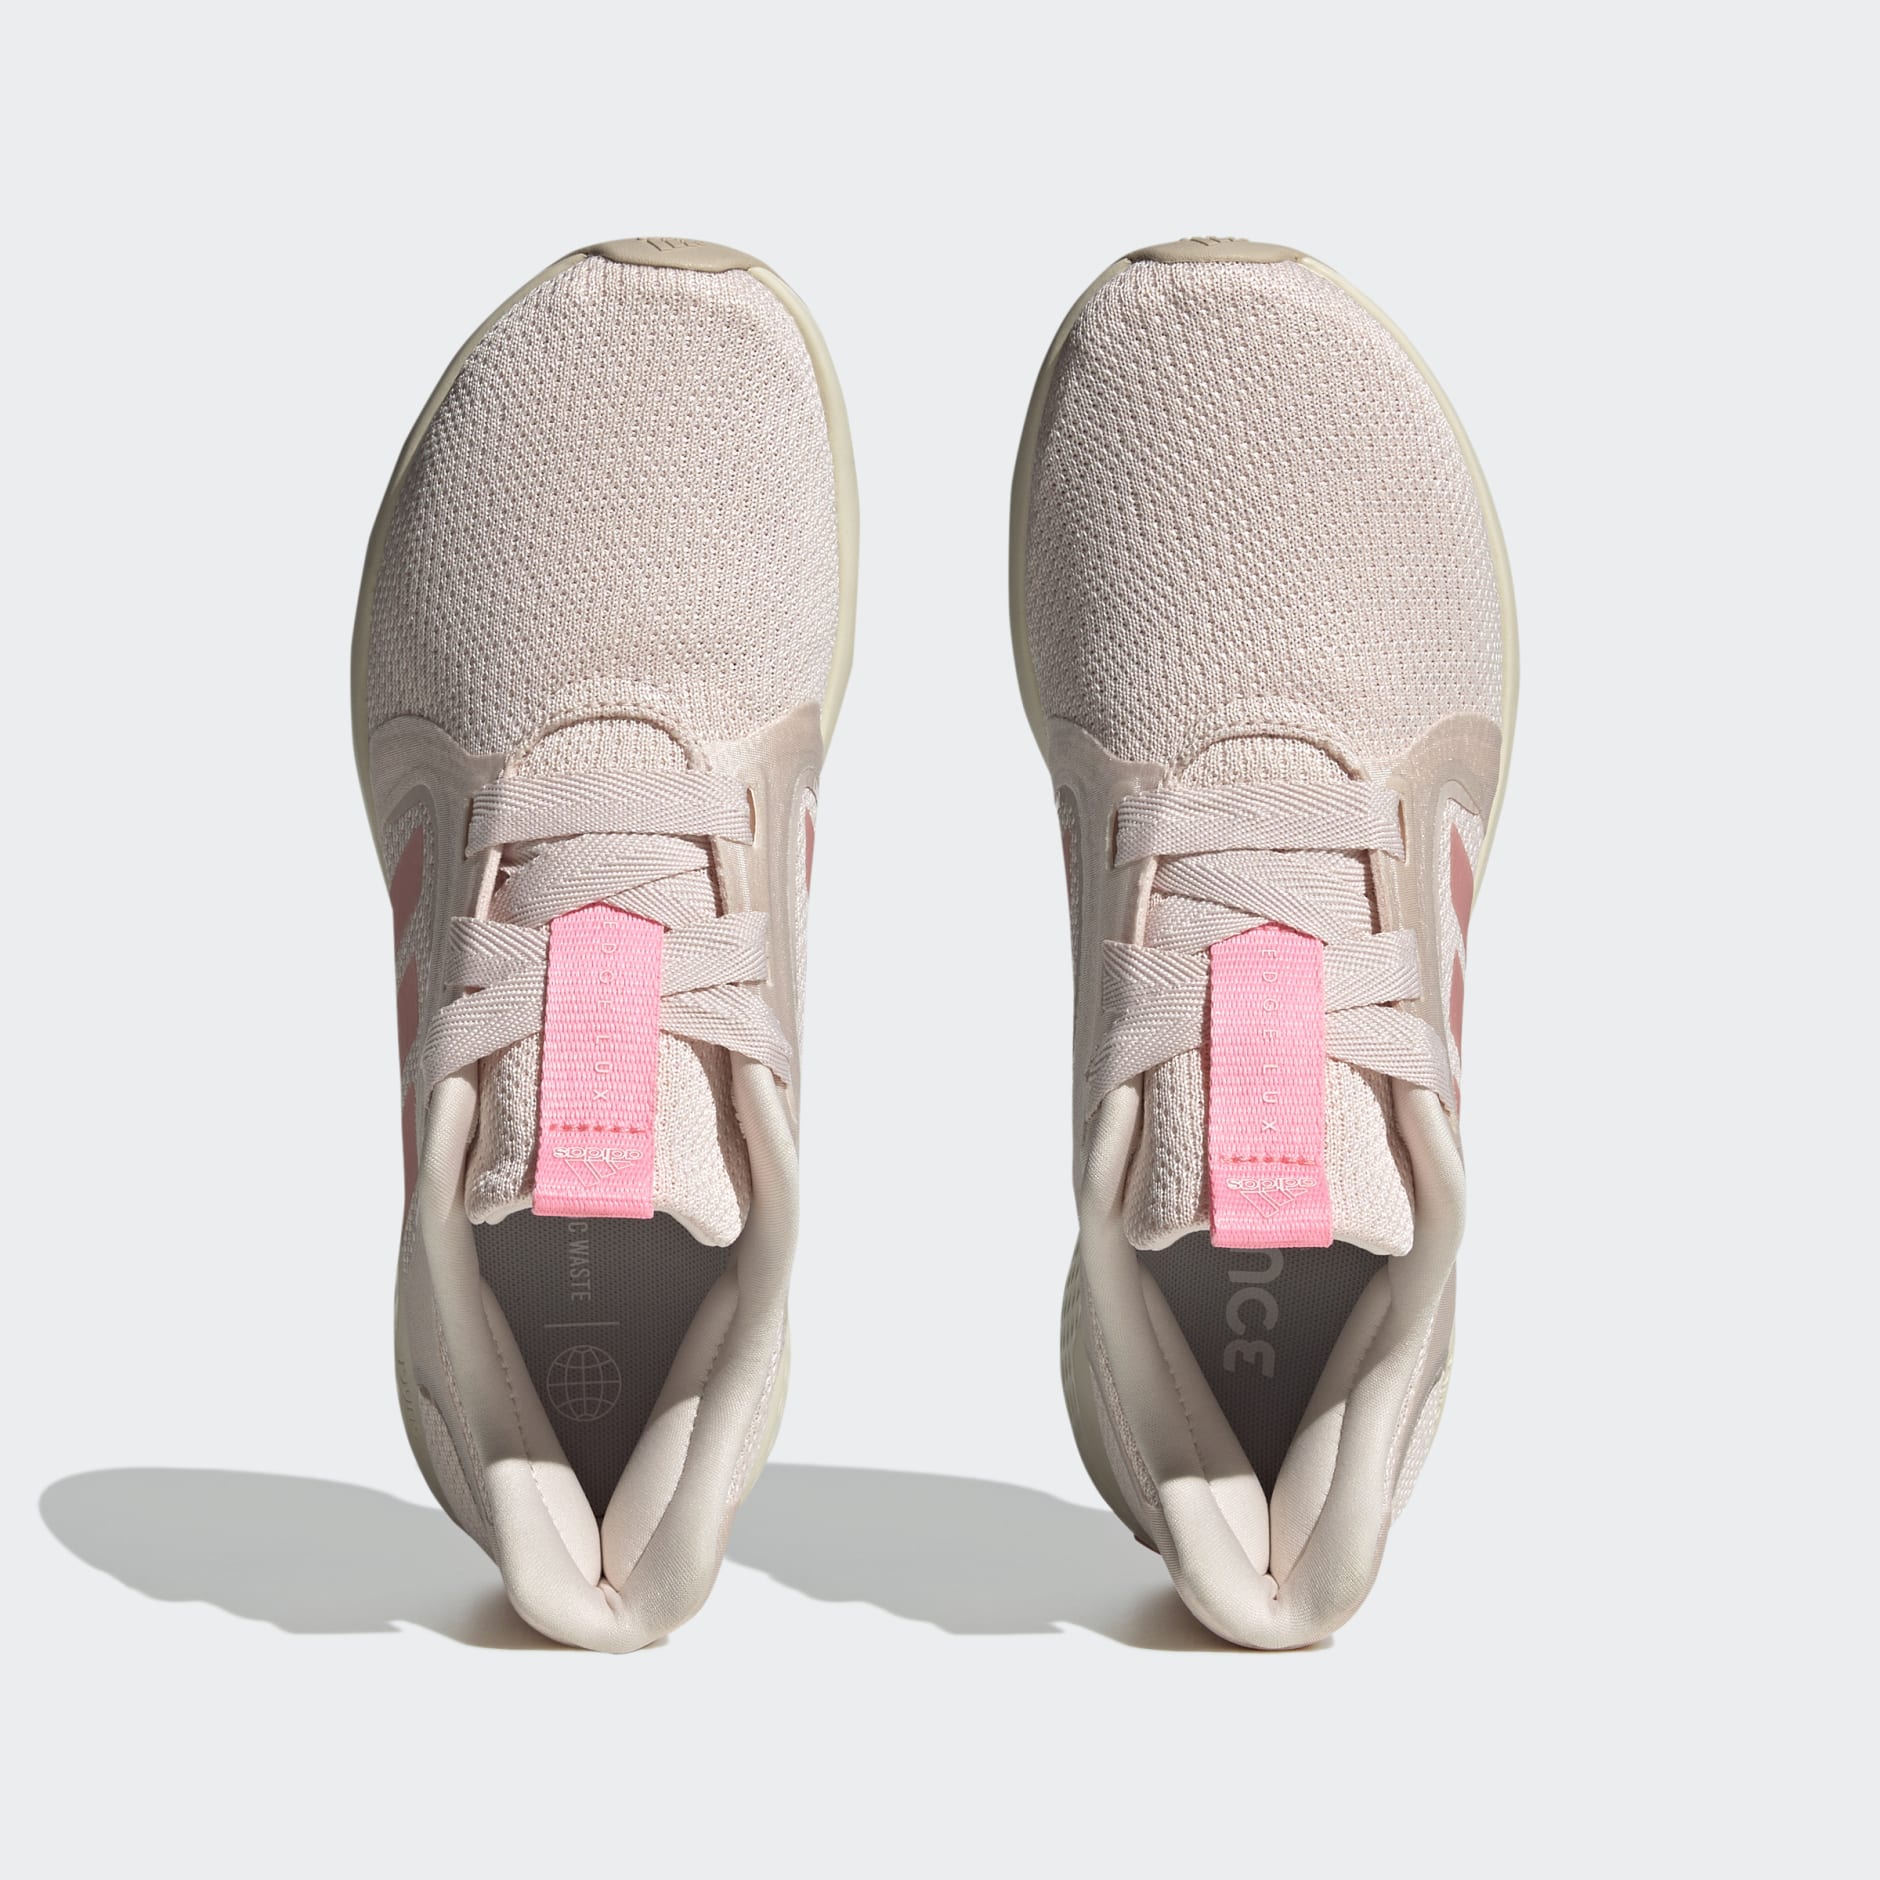 Shoes - Edge Lux Shoes - Pink | adidas South Africa